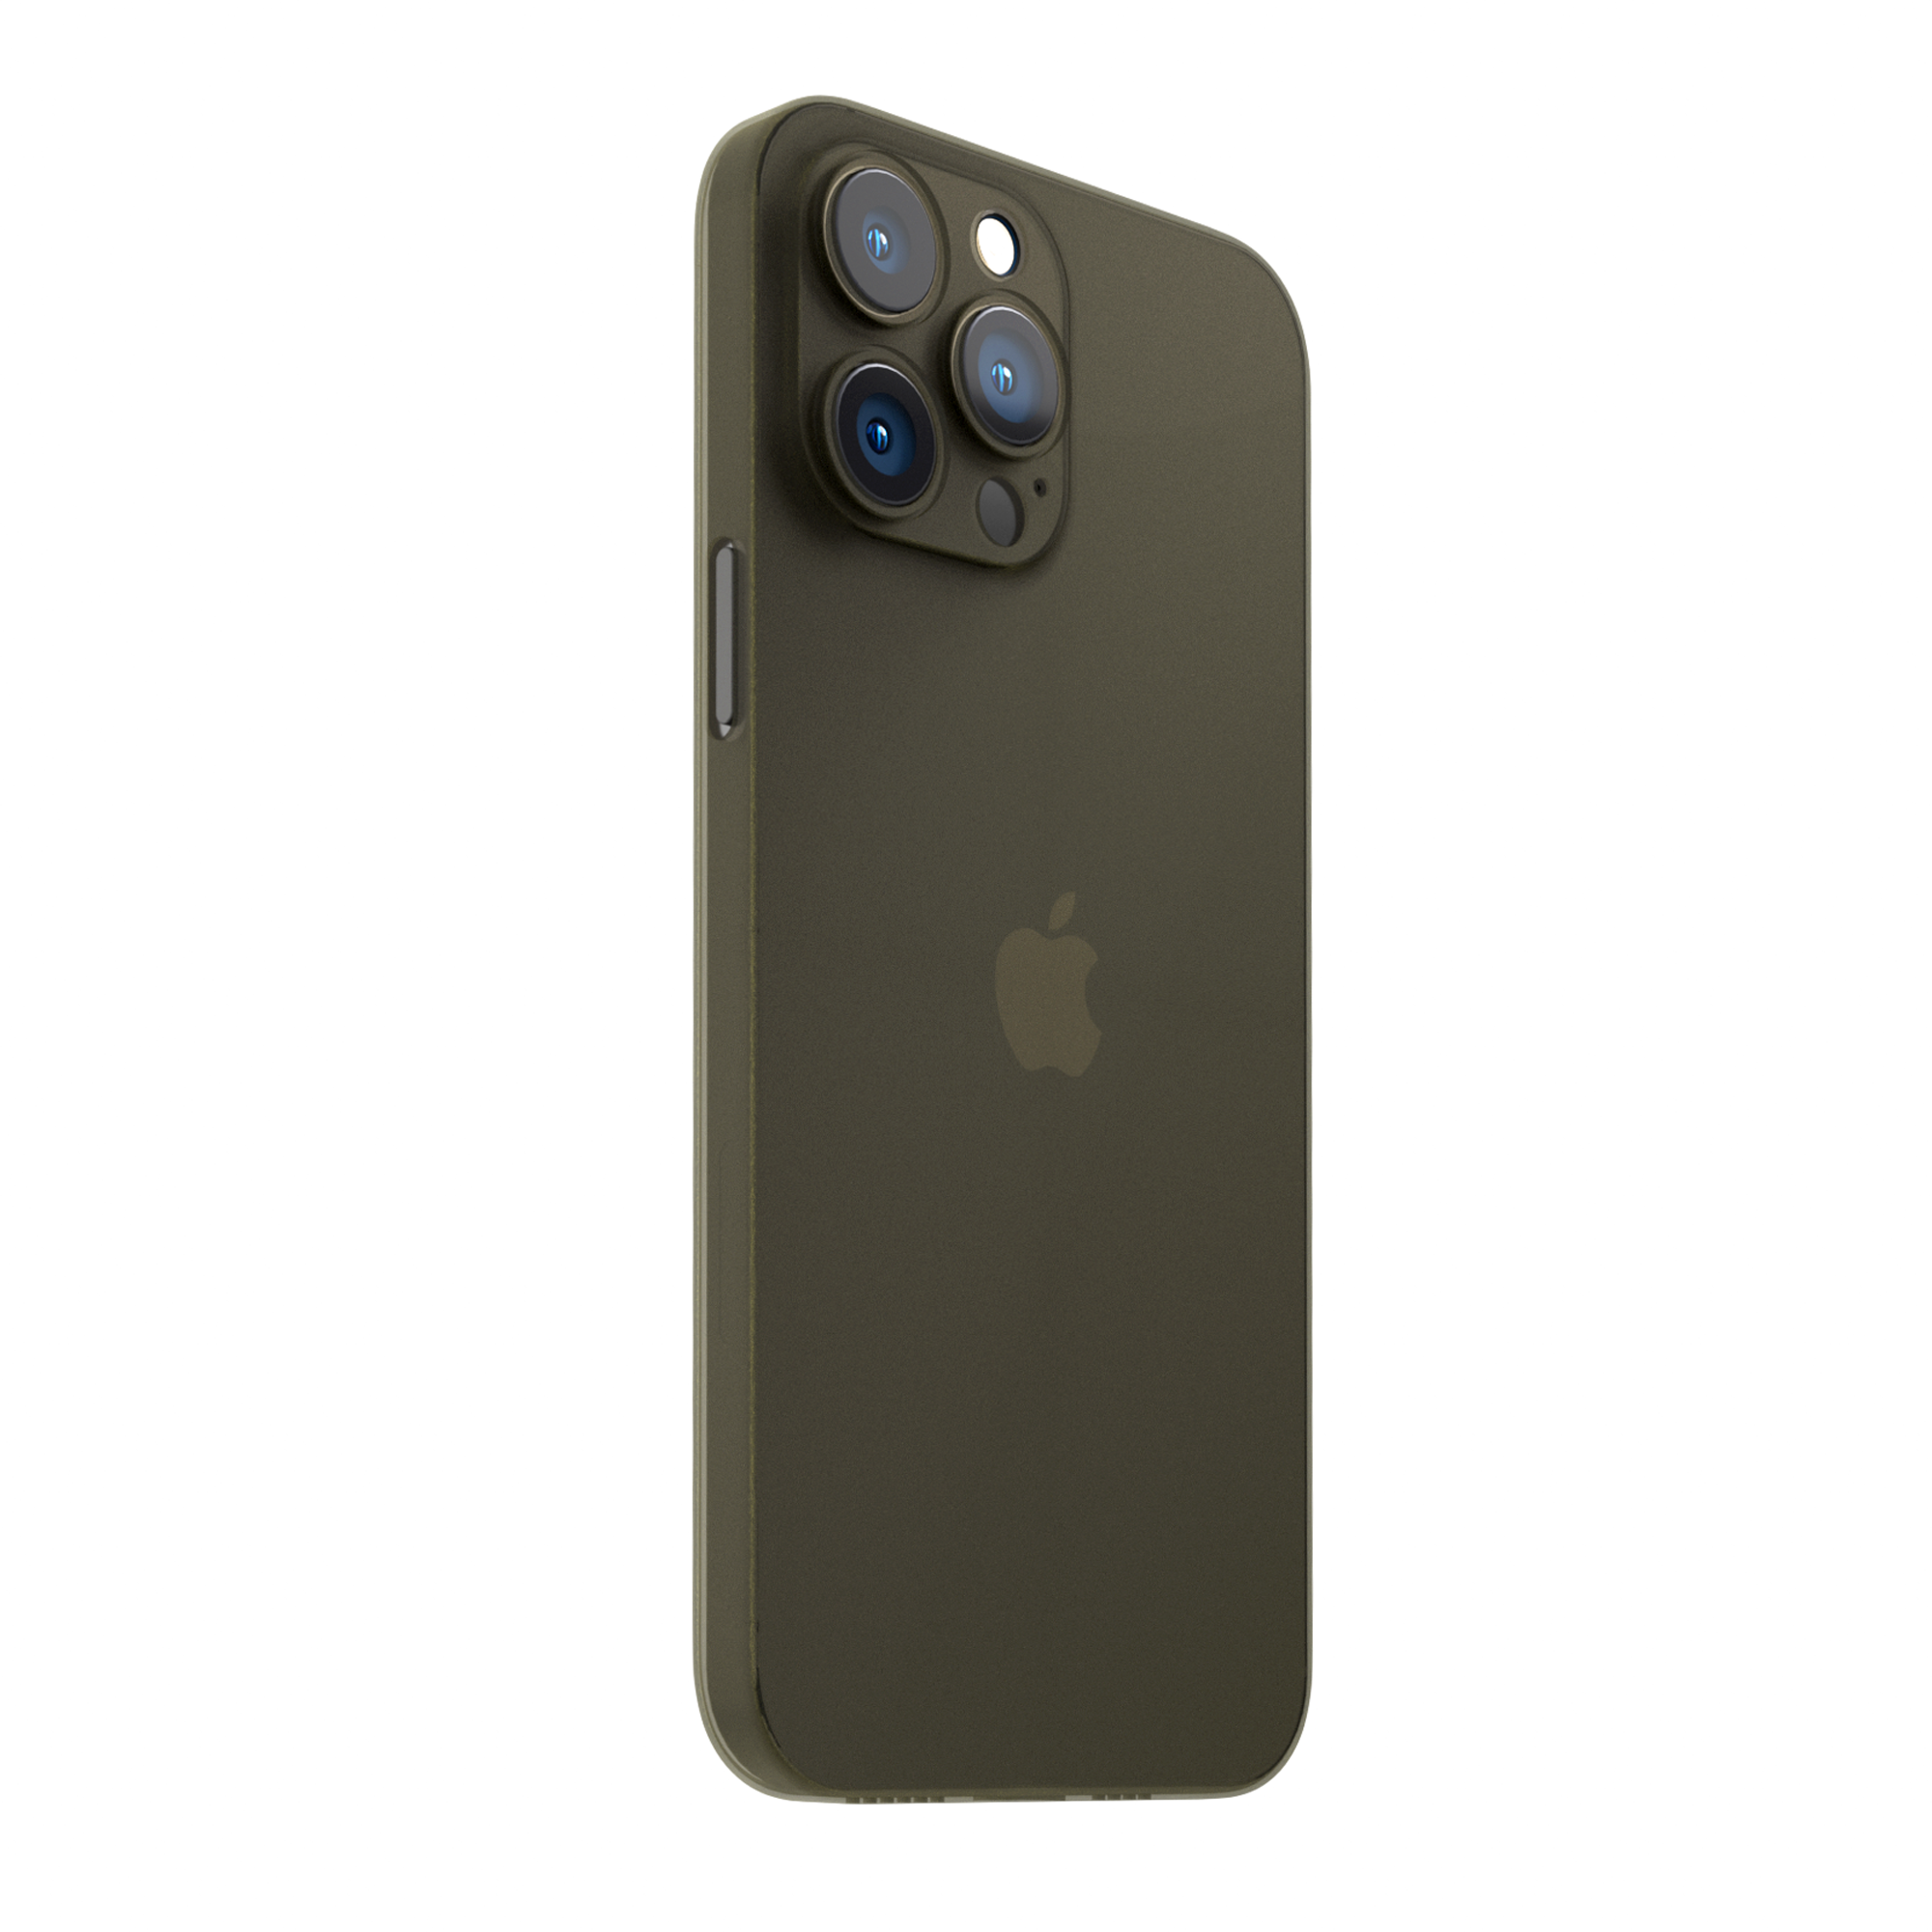 Slimcase Mobile Back Cover for iPhone 12 Pro Max